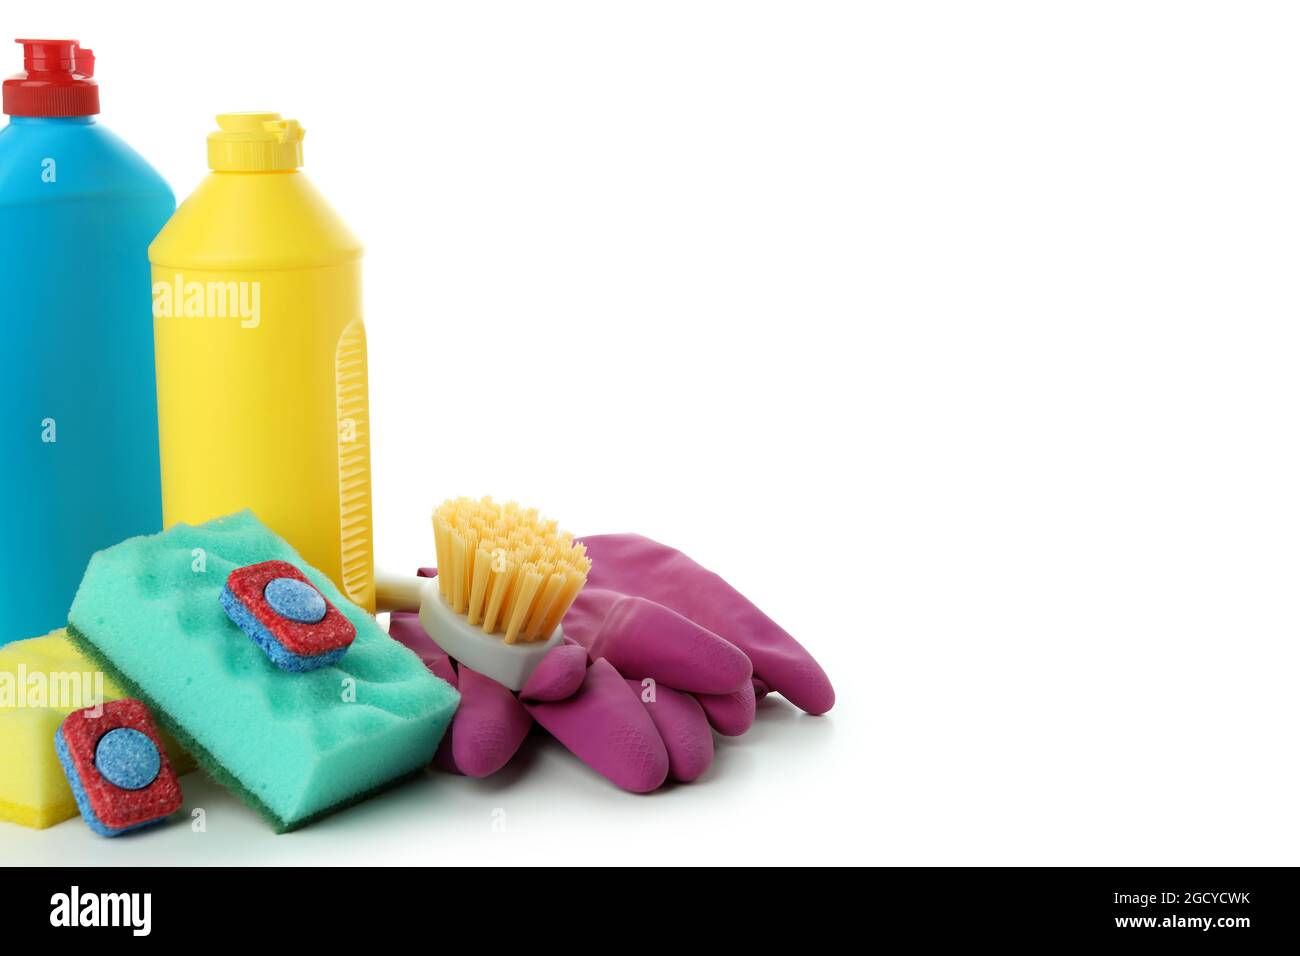 https://c8.alamy.com/comp/2GCYCWK/concept-of-dishwashing-detergent-accessories-isolated-on-white-background-2GCYCWK.jpg